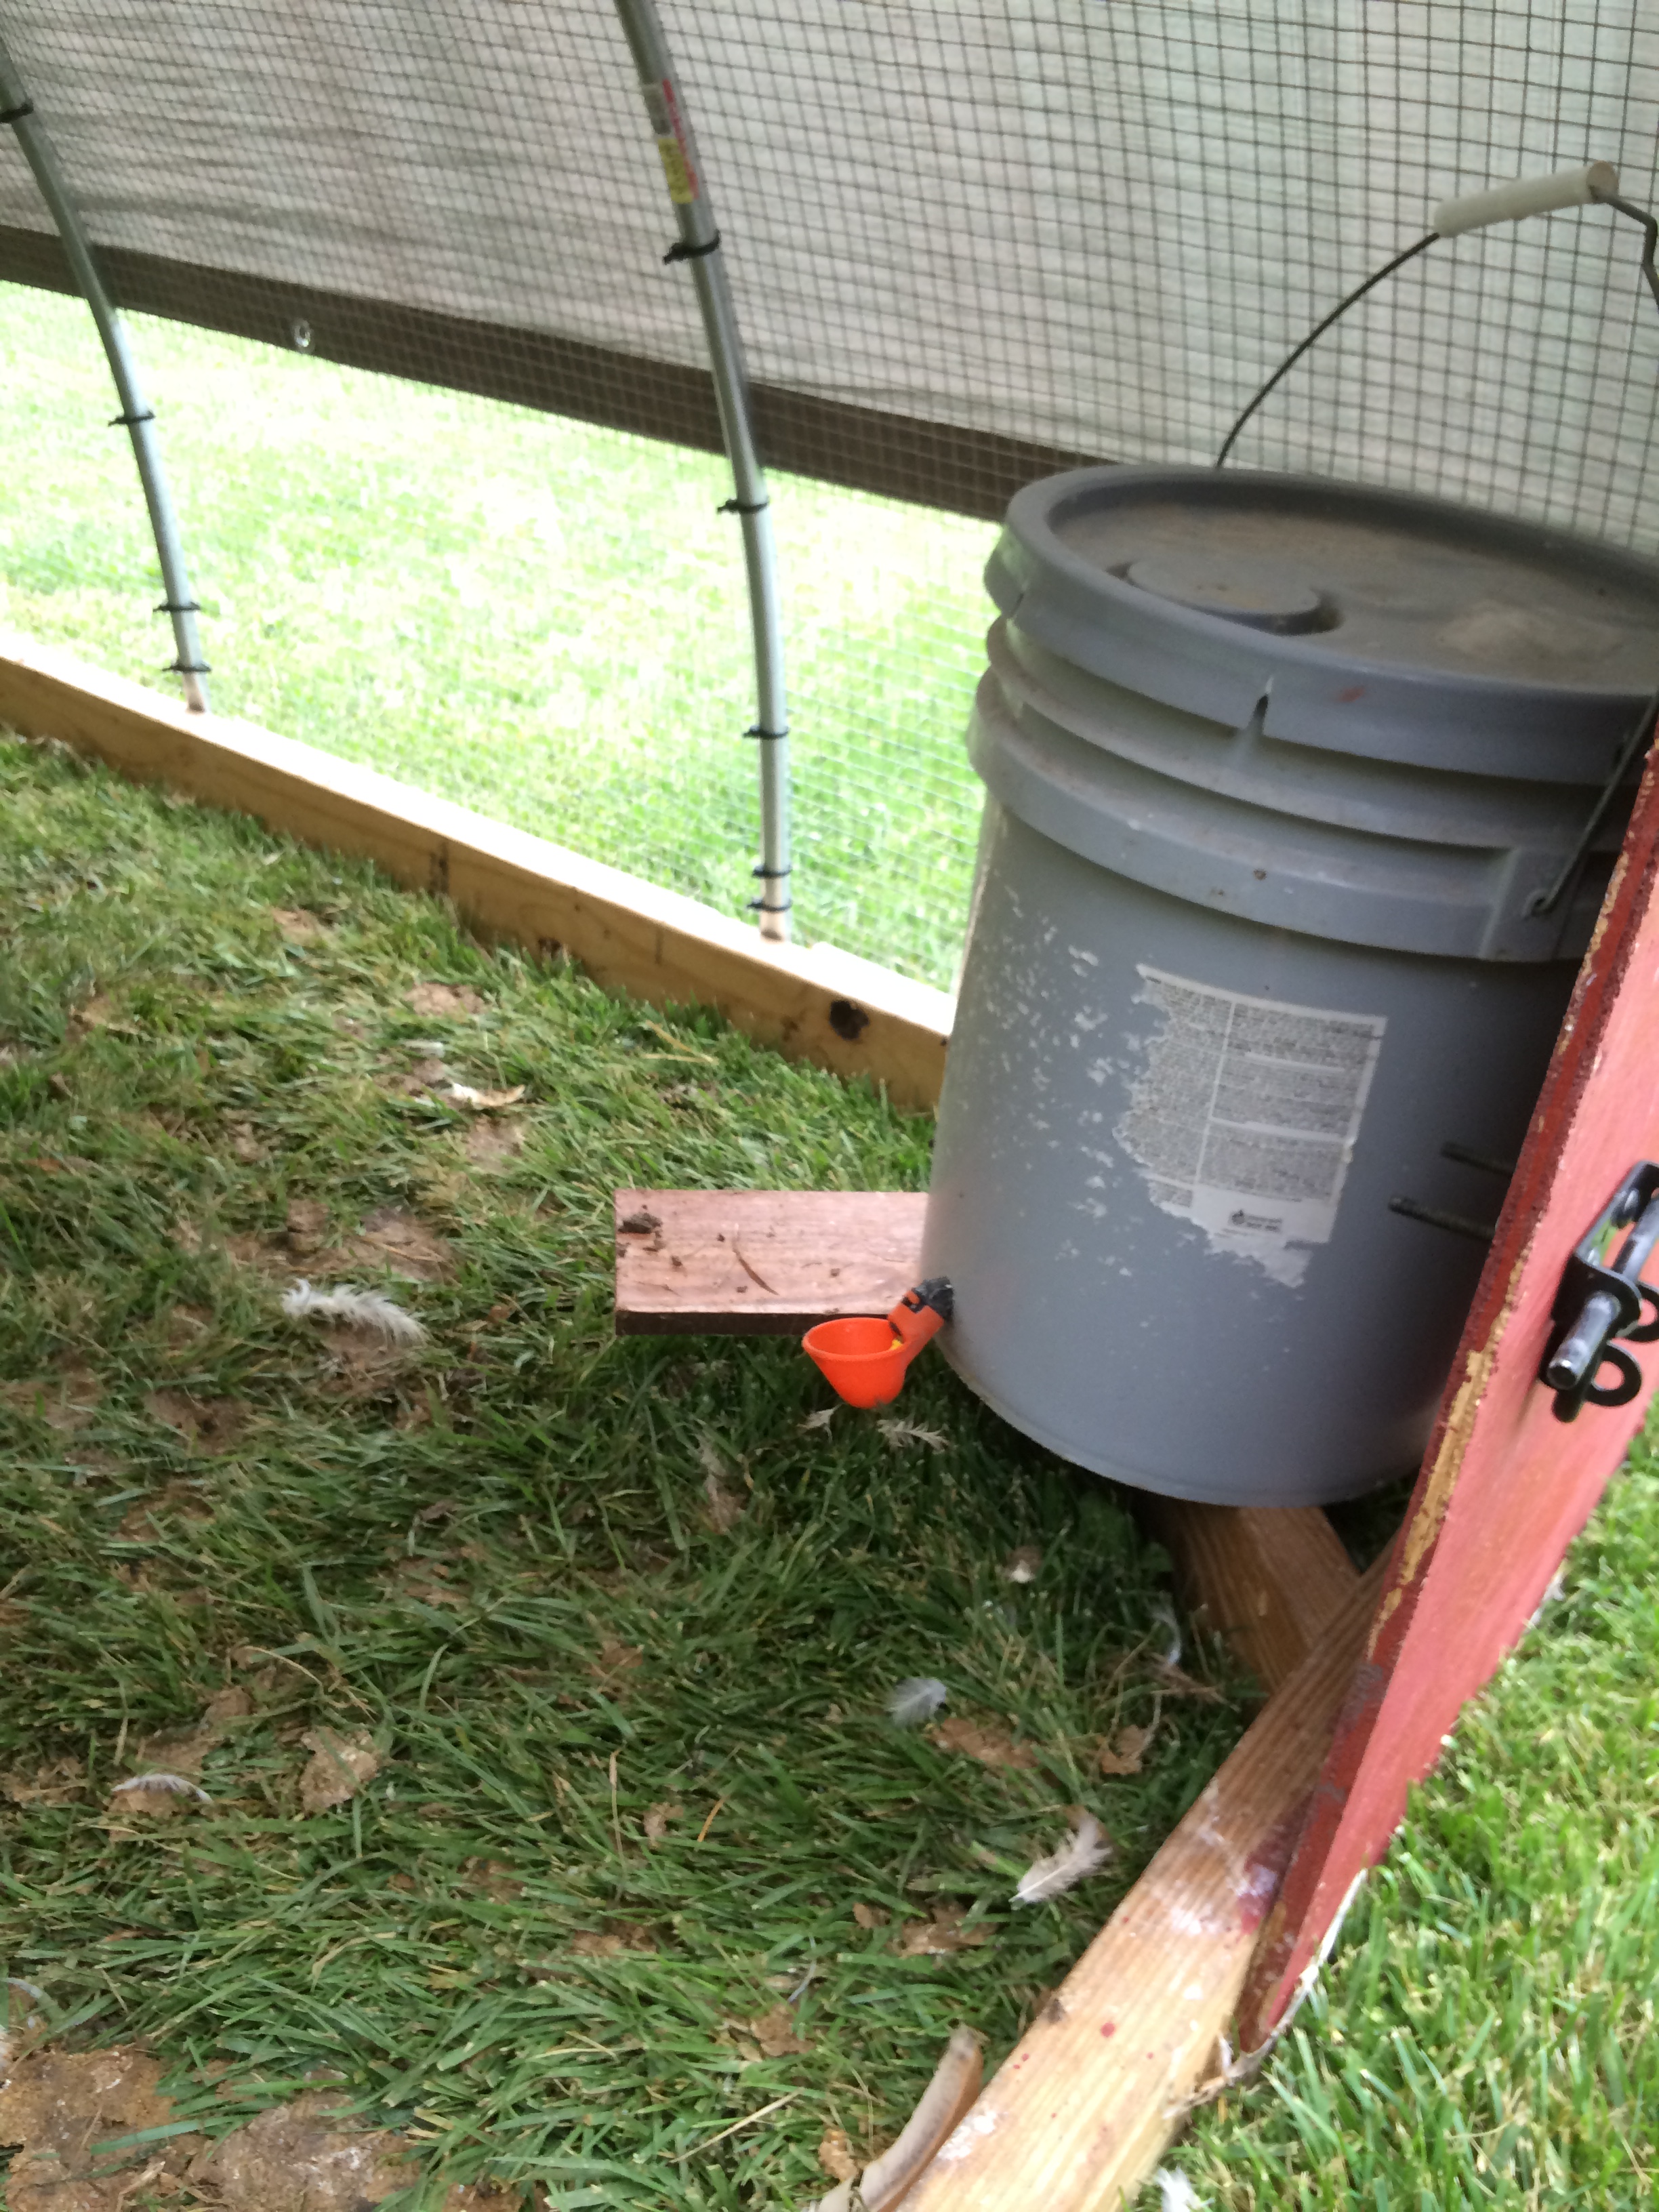 The corner braces support 5 gallon water buckets with drinker cups.  The broilers had no issue figuring them out and the pair of buckets lasted about 2 day as long as it wasnt too hot.